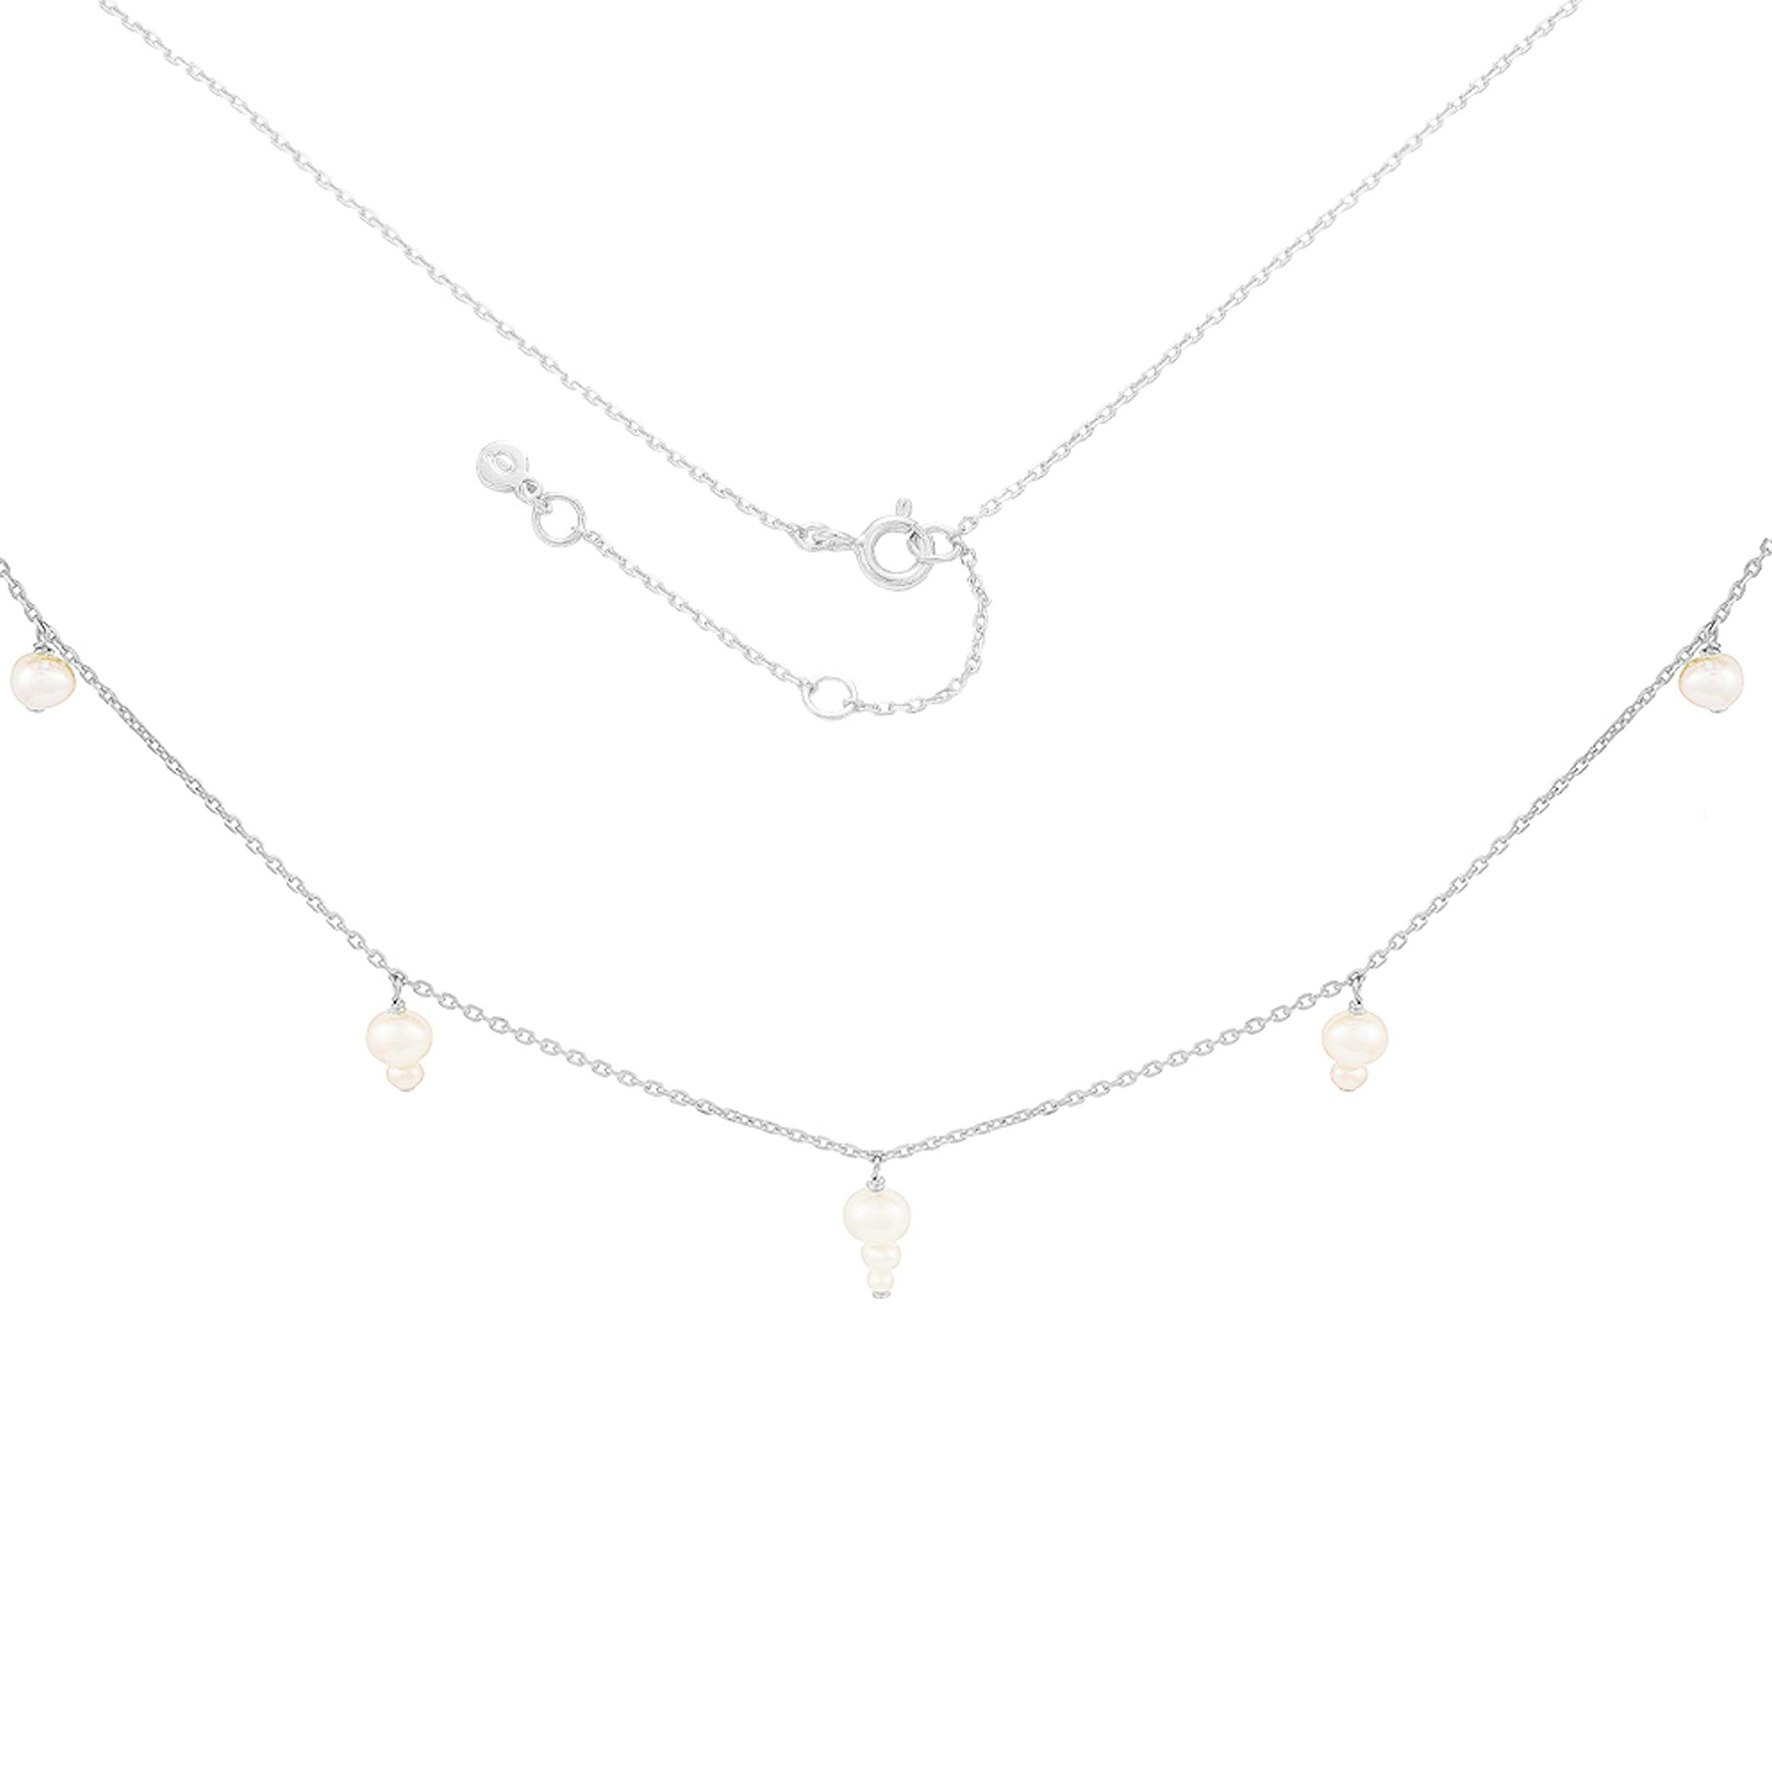 Esther Necklace from Hultquist Copenhagen in Silver Sterling 925